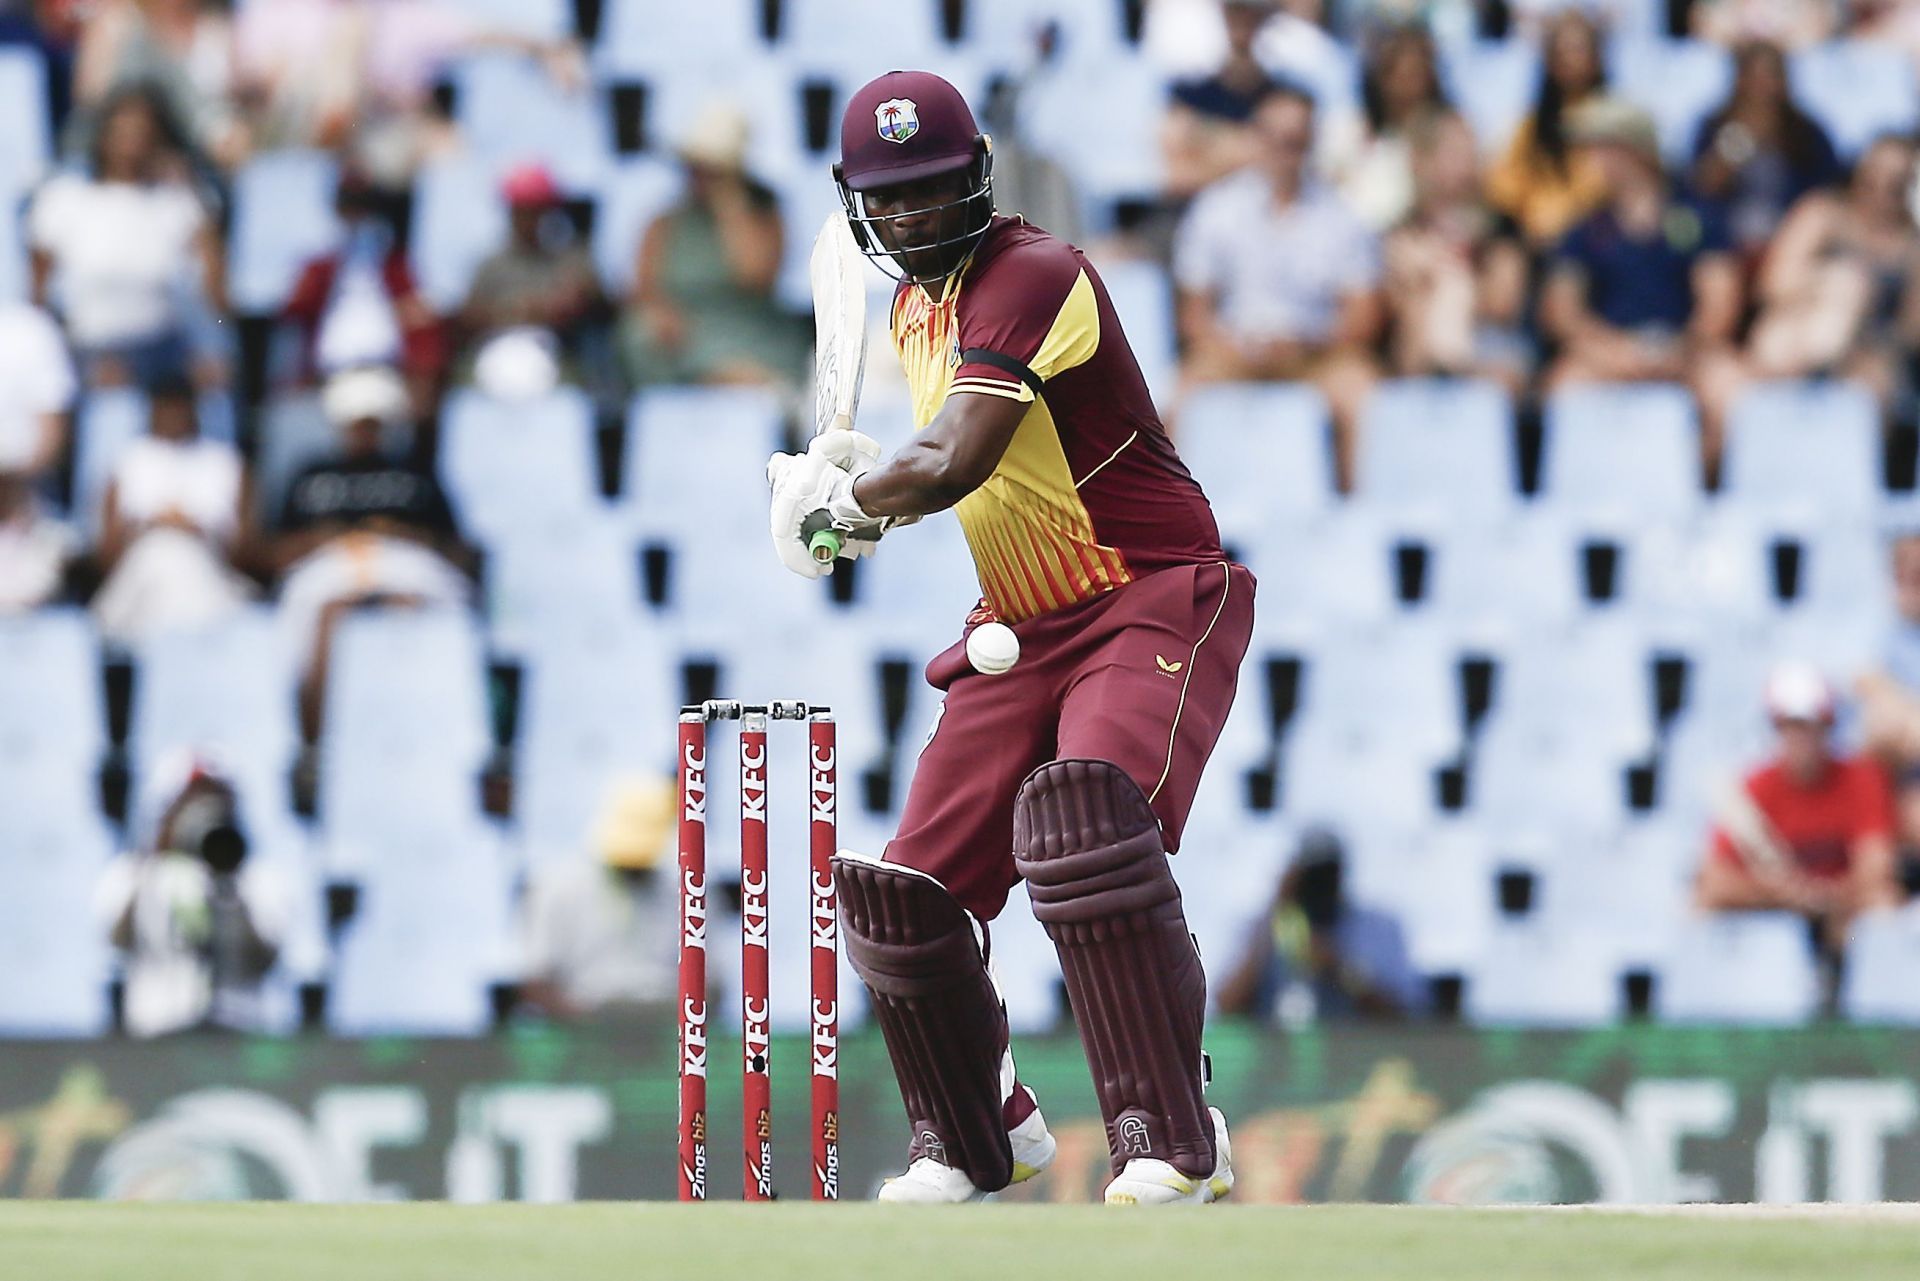 West Indies batter Johnson Charles (Pic: Getty Images)